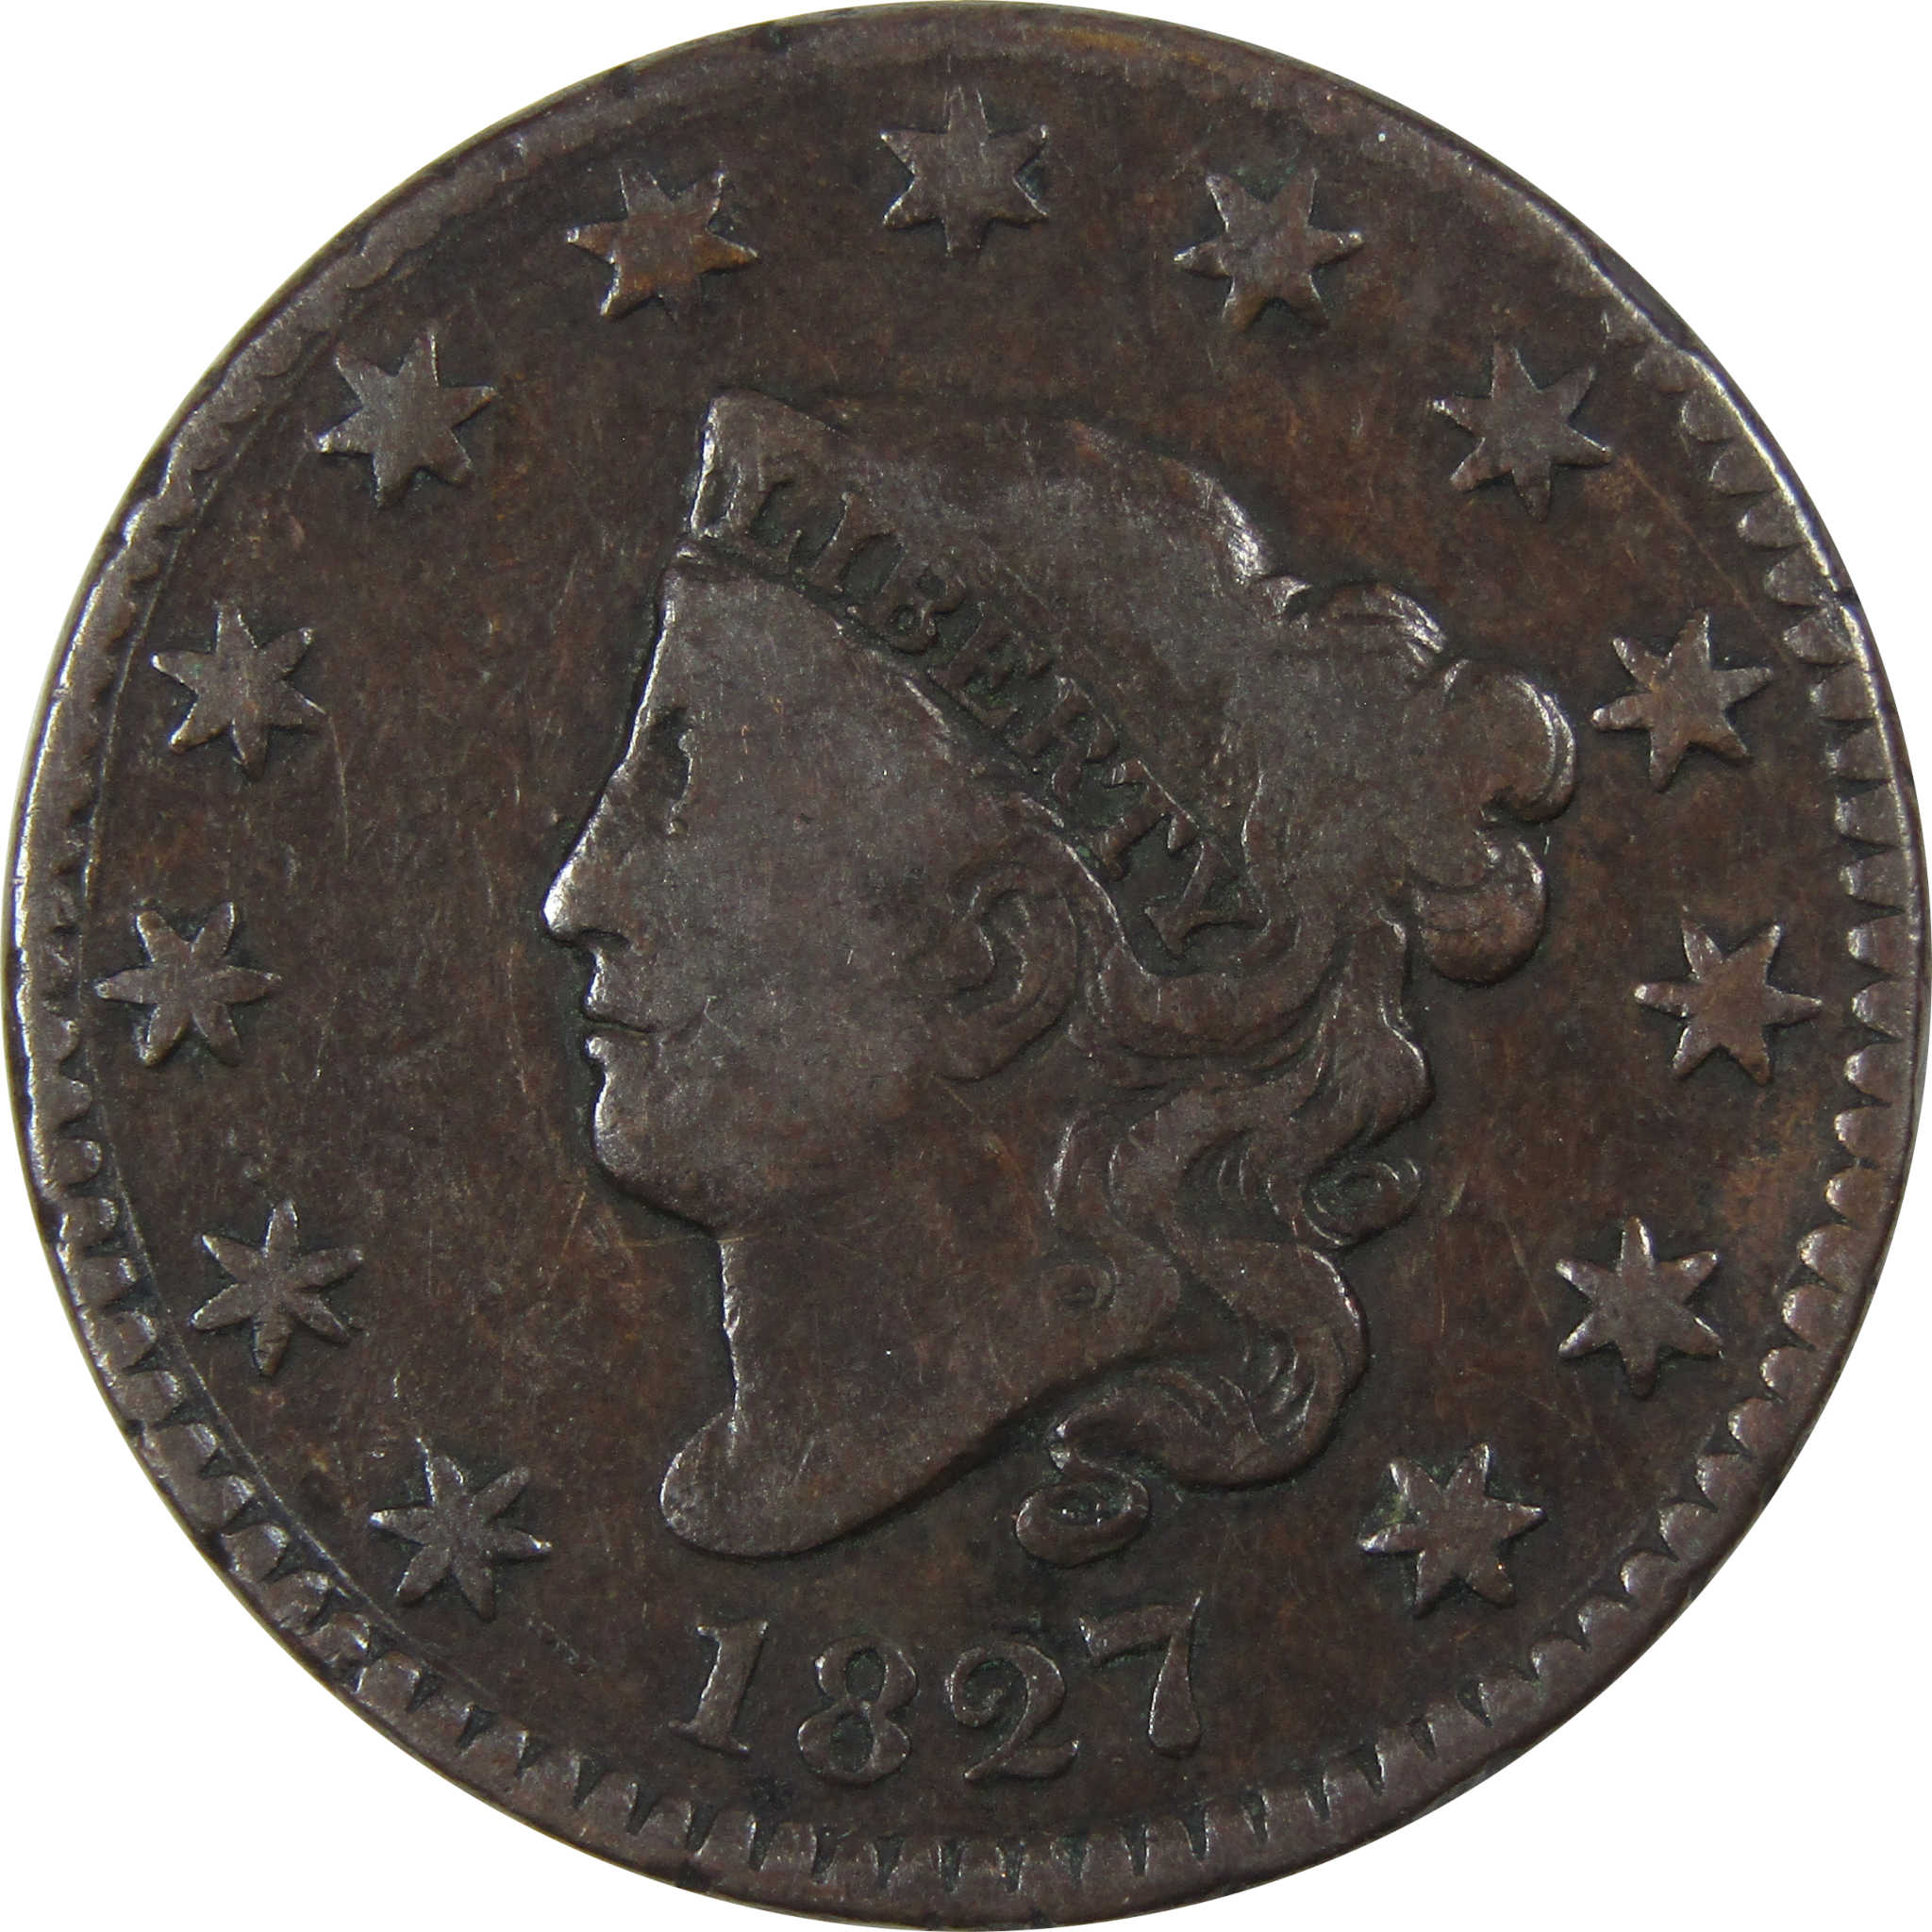 1827 Coronet Head Large Cent VG Very Good Copper Penny Coin SKU:I775